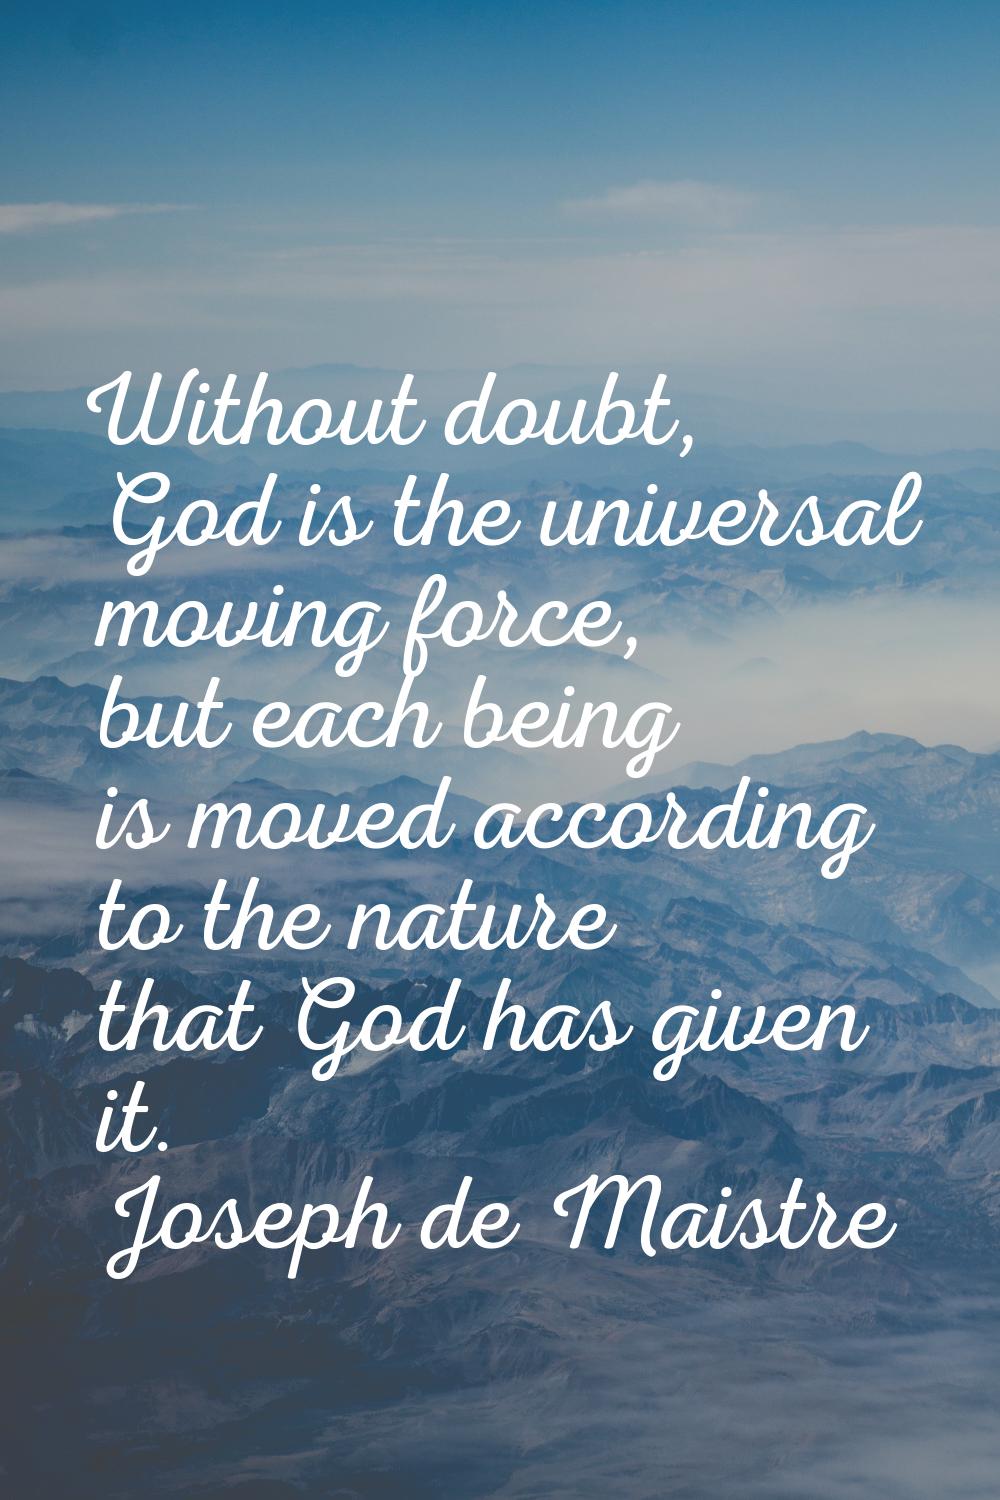 Without doubt, God is the universal moving force, but each being is moved according to the nature t